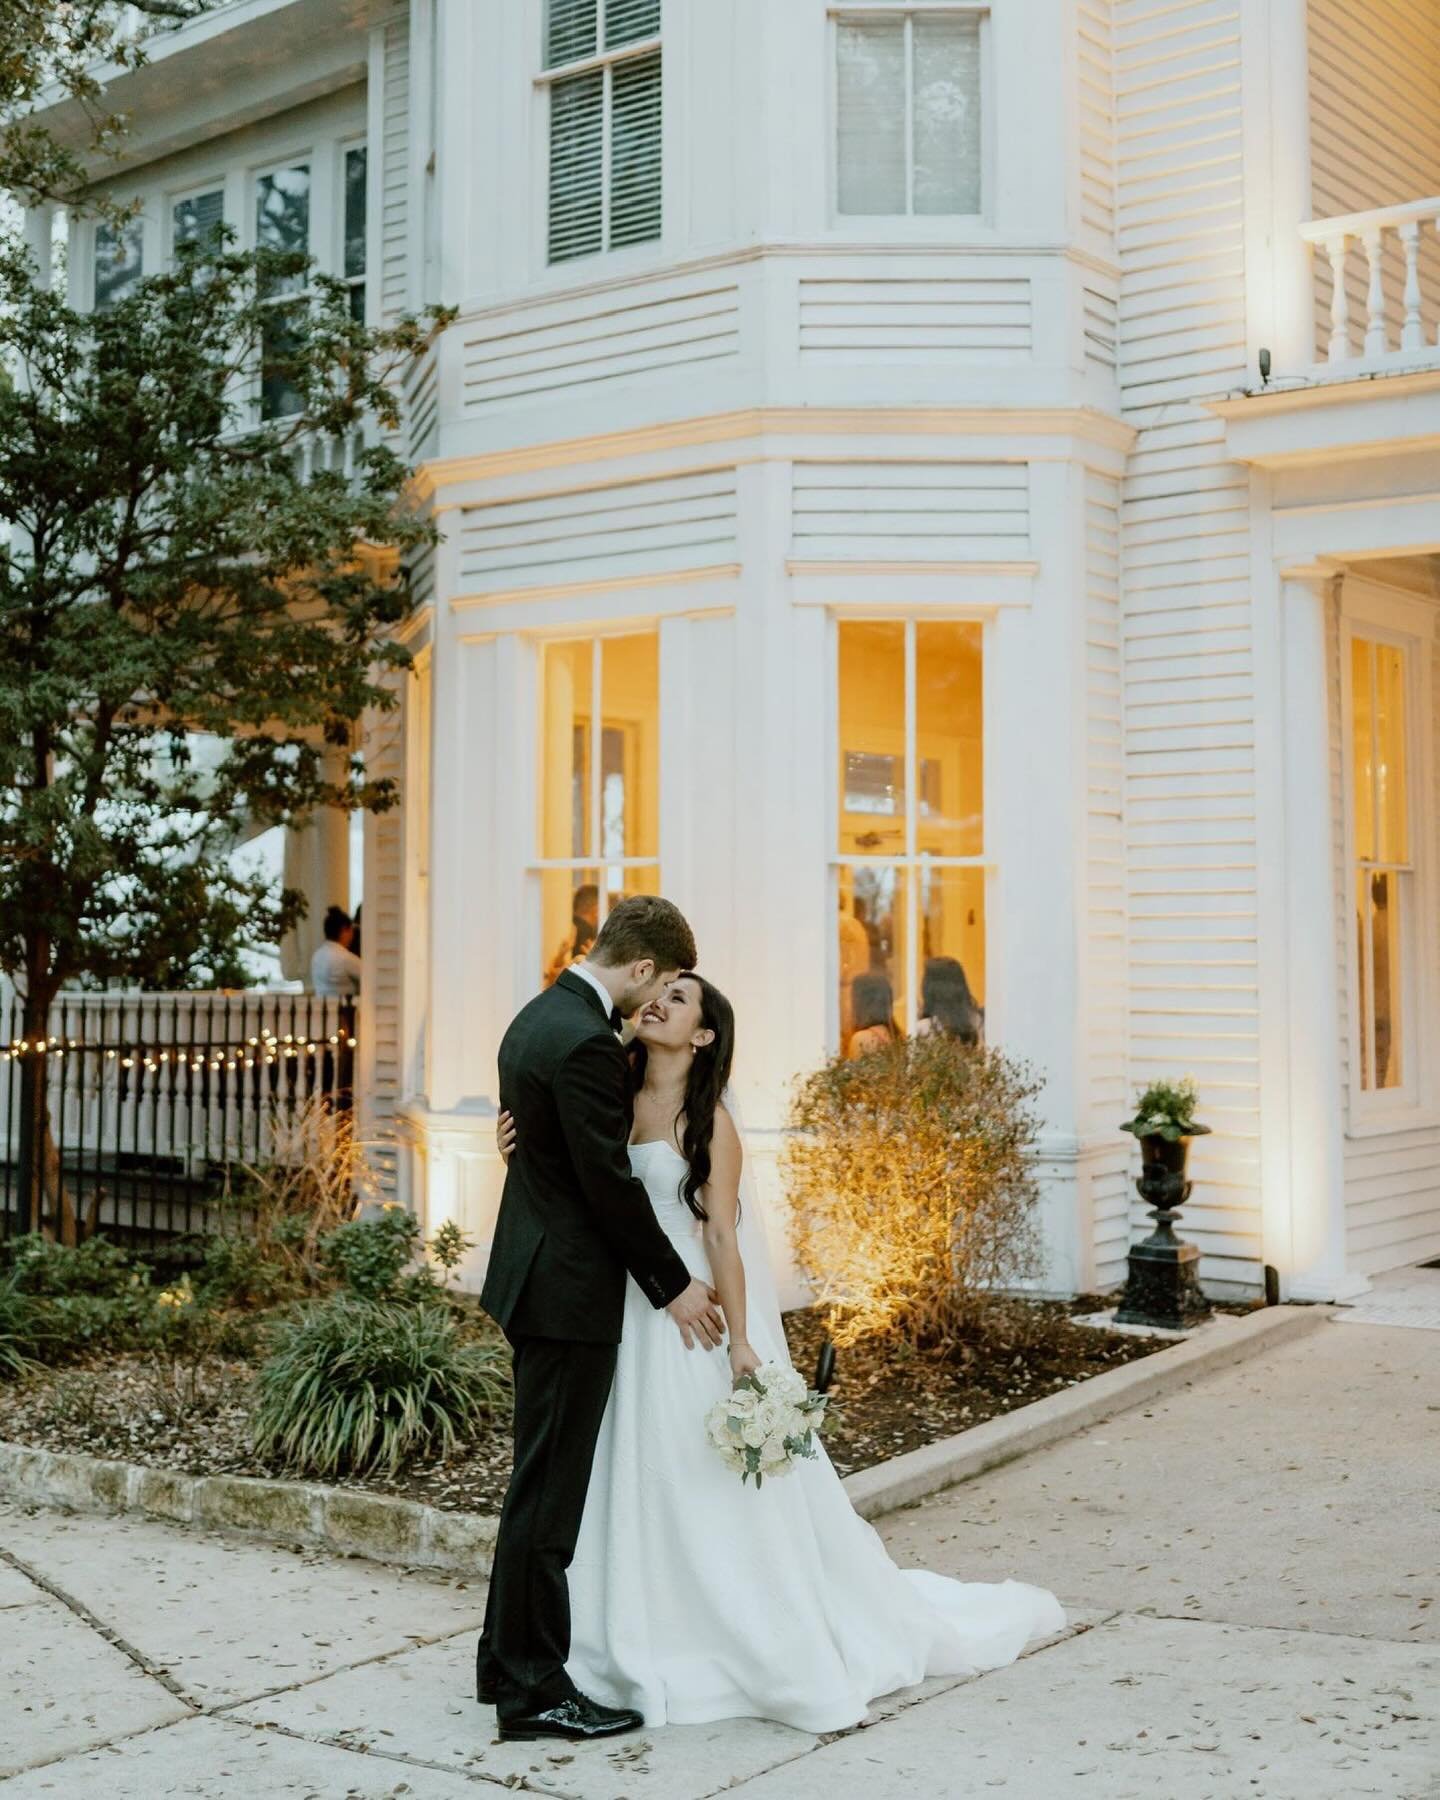 Adding a dash more of perfection to the mix - Now that I&rsquo;m officially back to the office, let&rsquo;s keep chatting about the first wedding of the year back in February. Remember that dress with a mind of its own? Well, A&amp;R&rsquo;s Austin w